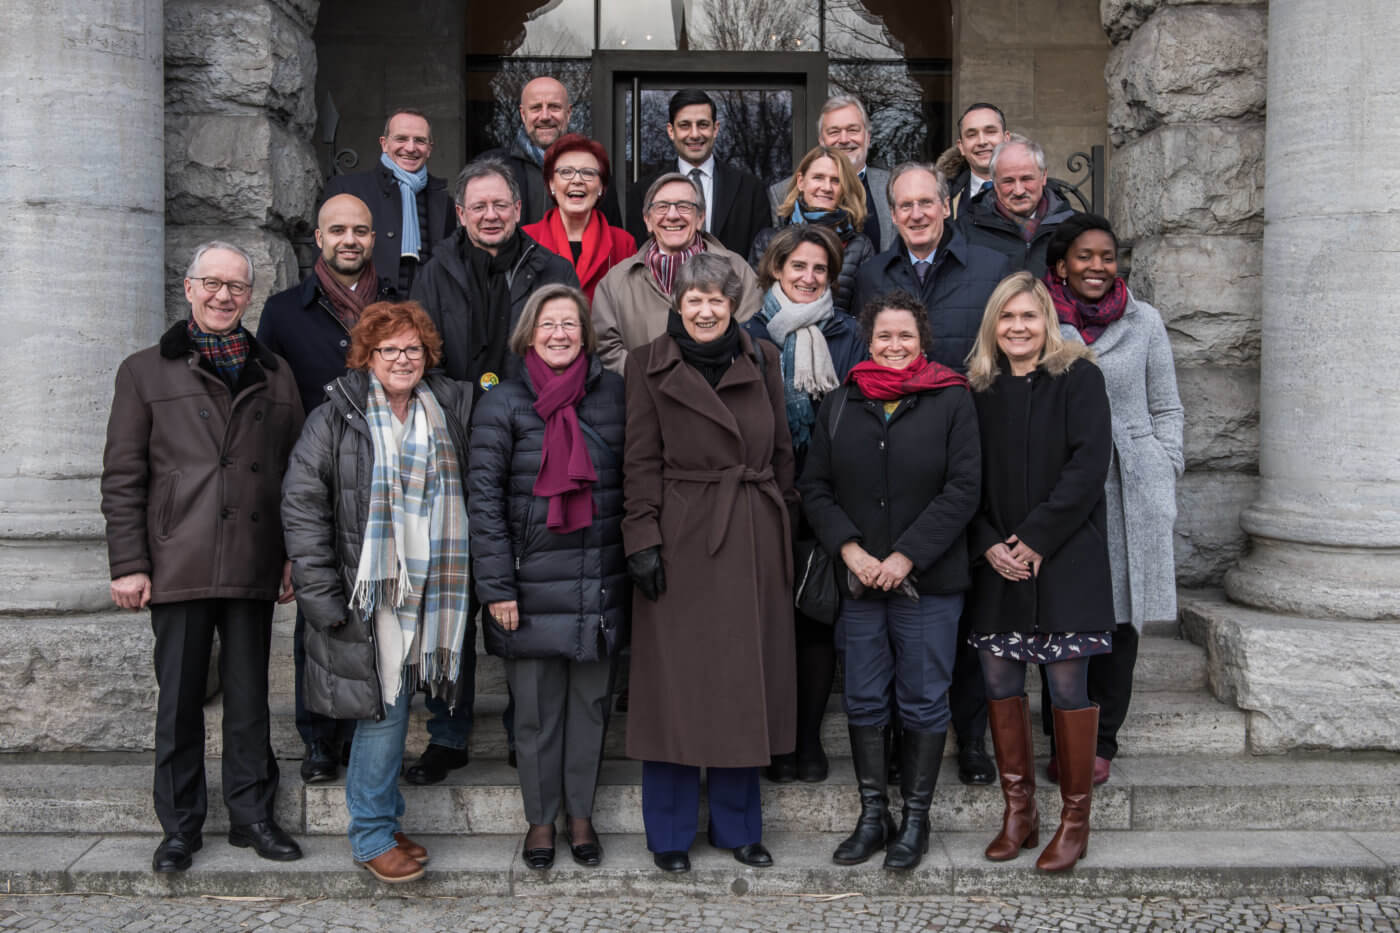 The group of international experts and RNE Council members at their meeting from February, 26 to March, 2nd 2018 in Berlin - Photo: Ralf Rühmeier, © German Council for Sustainable Development (RNE)